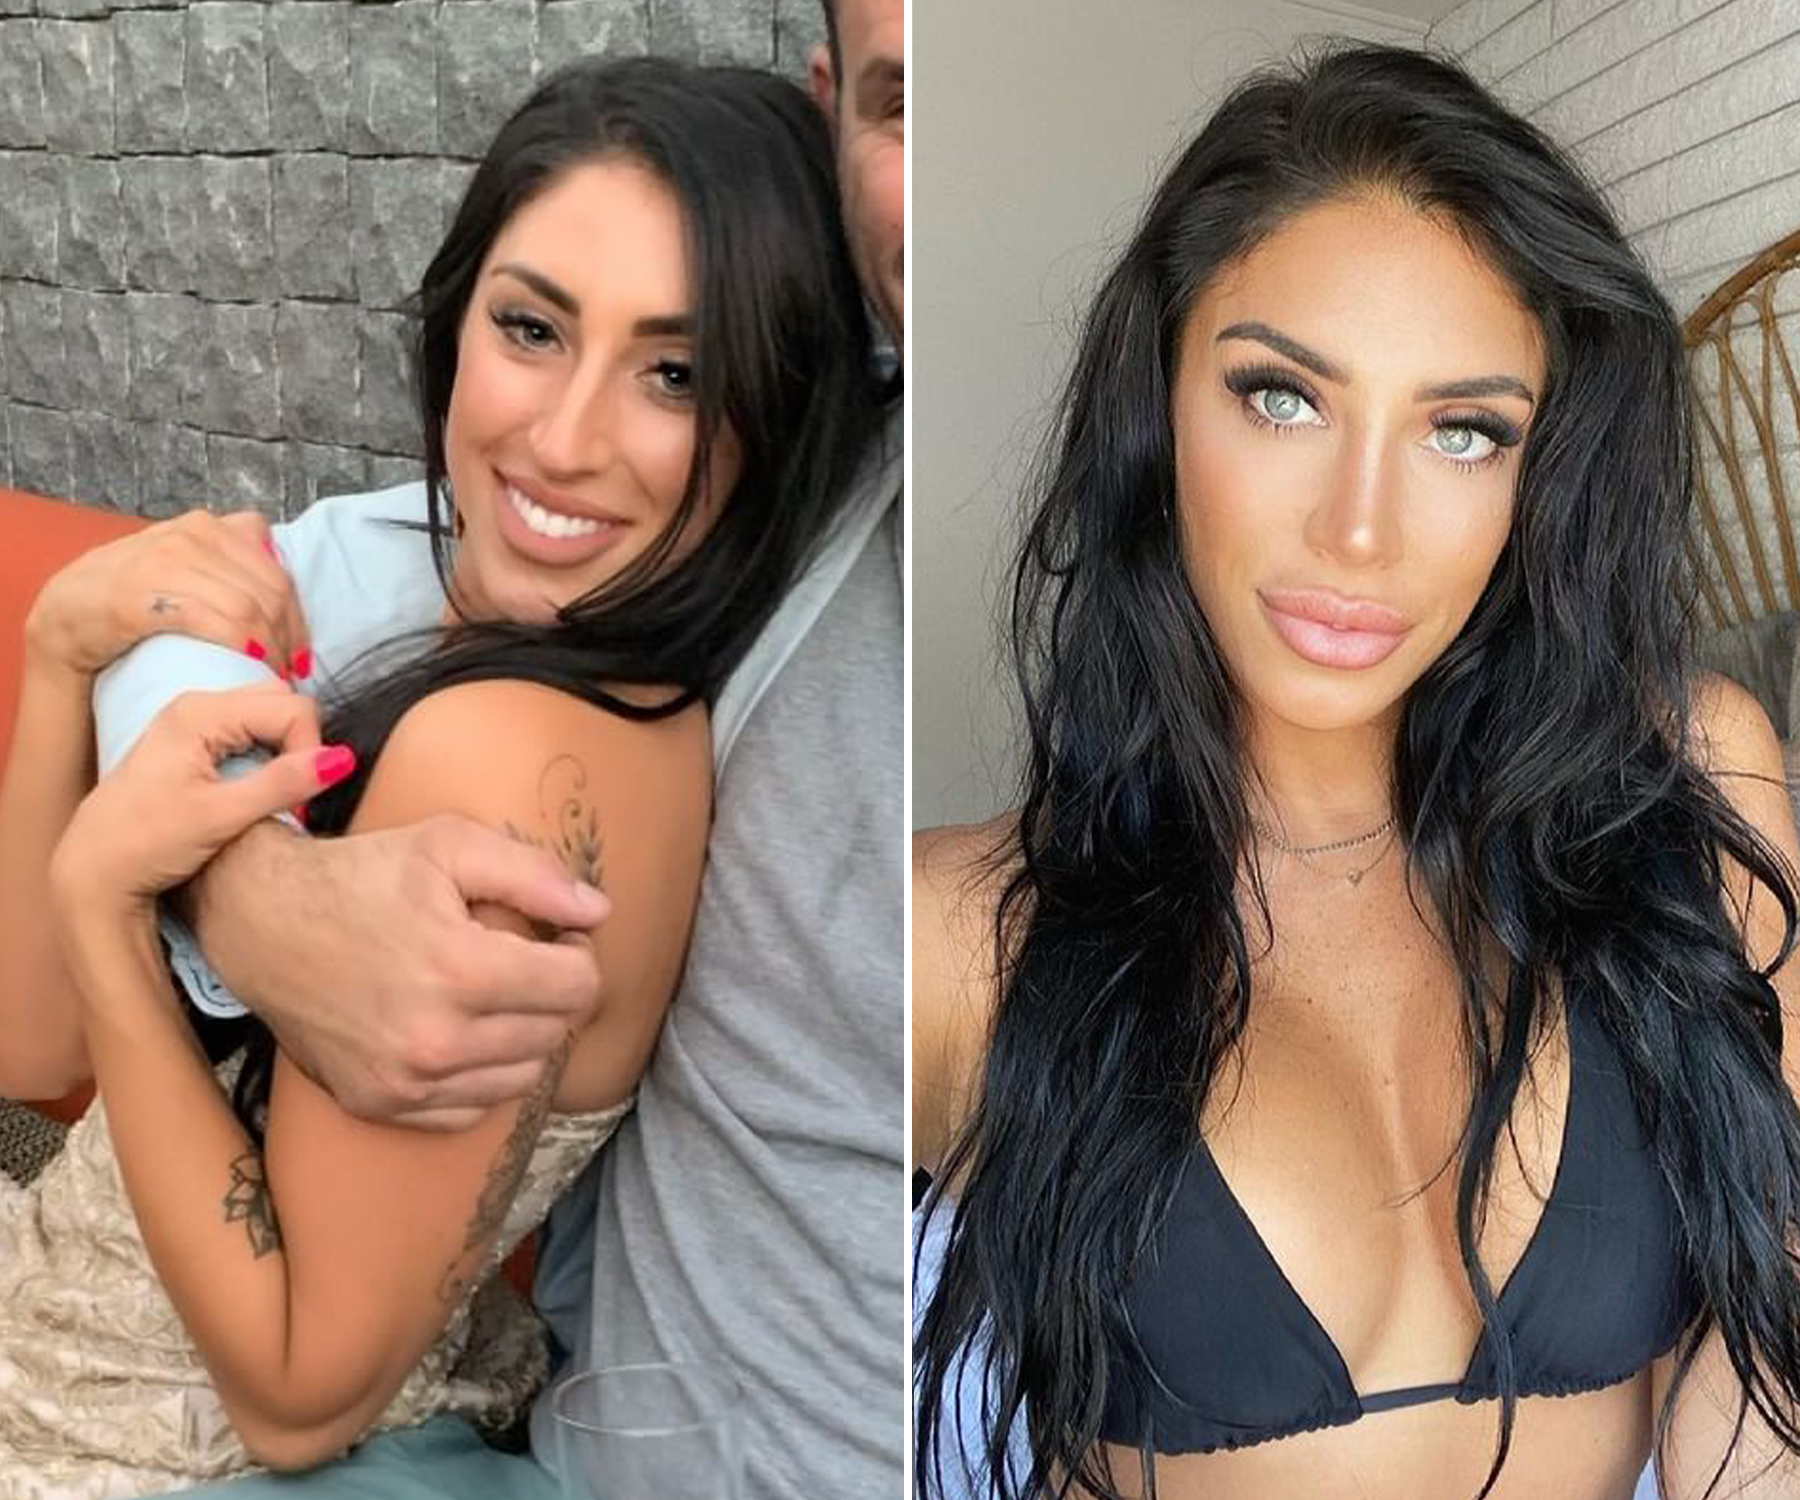 Inside Married At First Sight star Nikita's mind-boggling surgery -  including boob job that made her a 34G